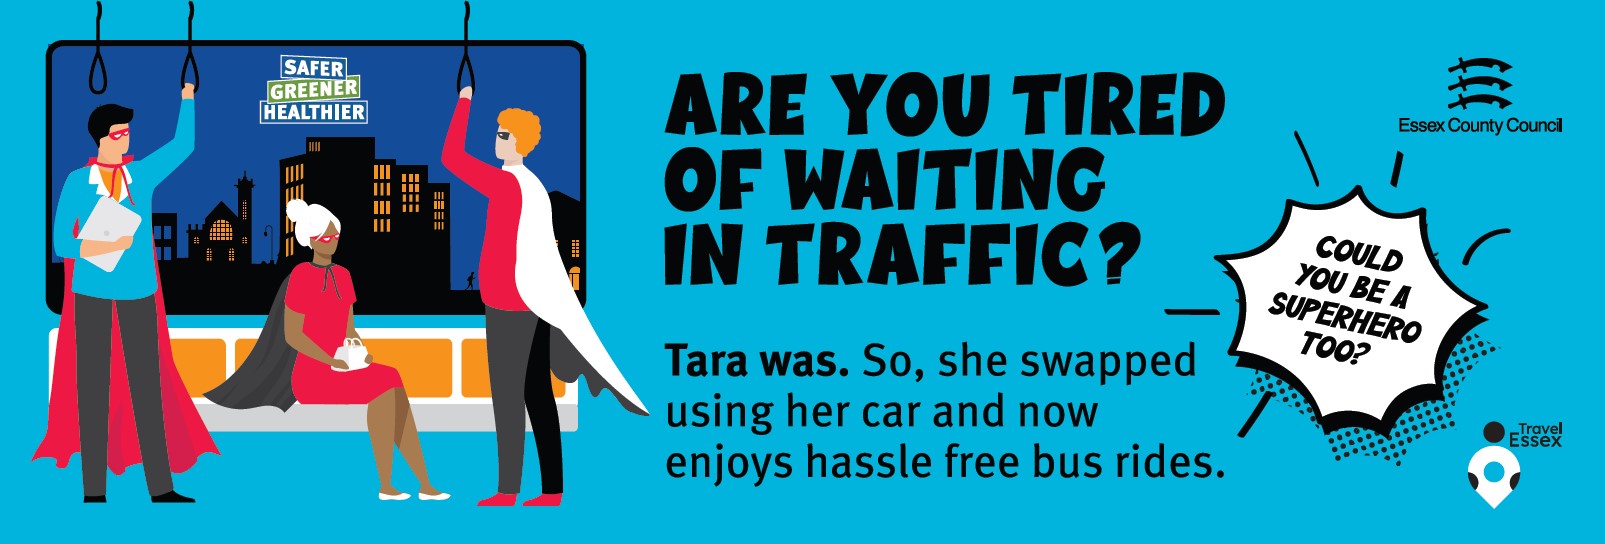 Are you tired of waiting in traffic? Tara was. So she swapped using her car and now enkoys hassle free bus rides. 